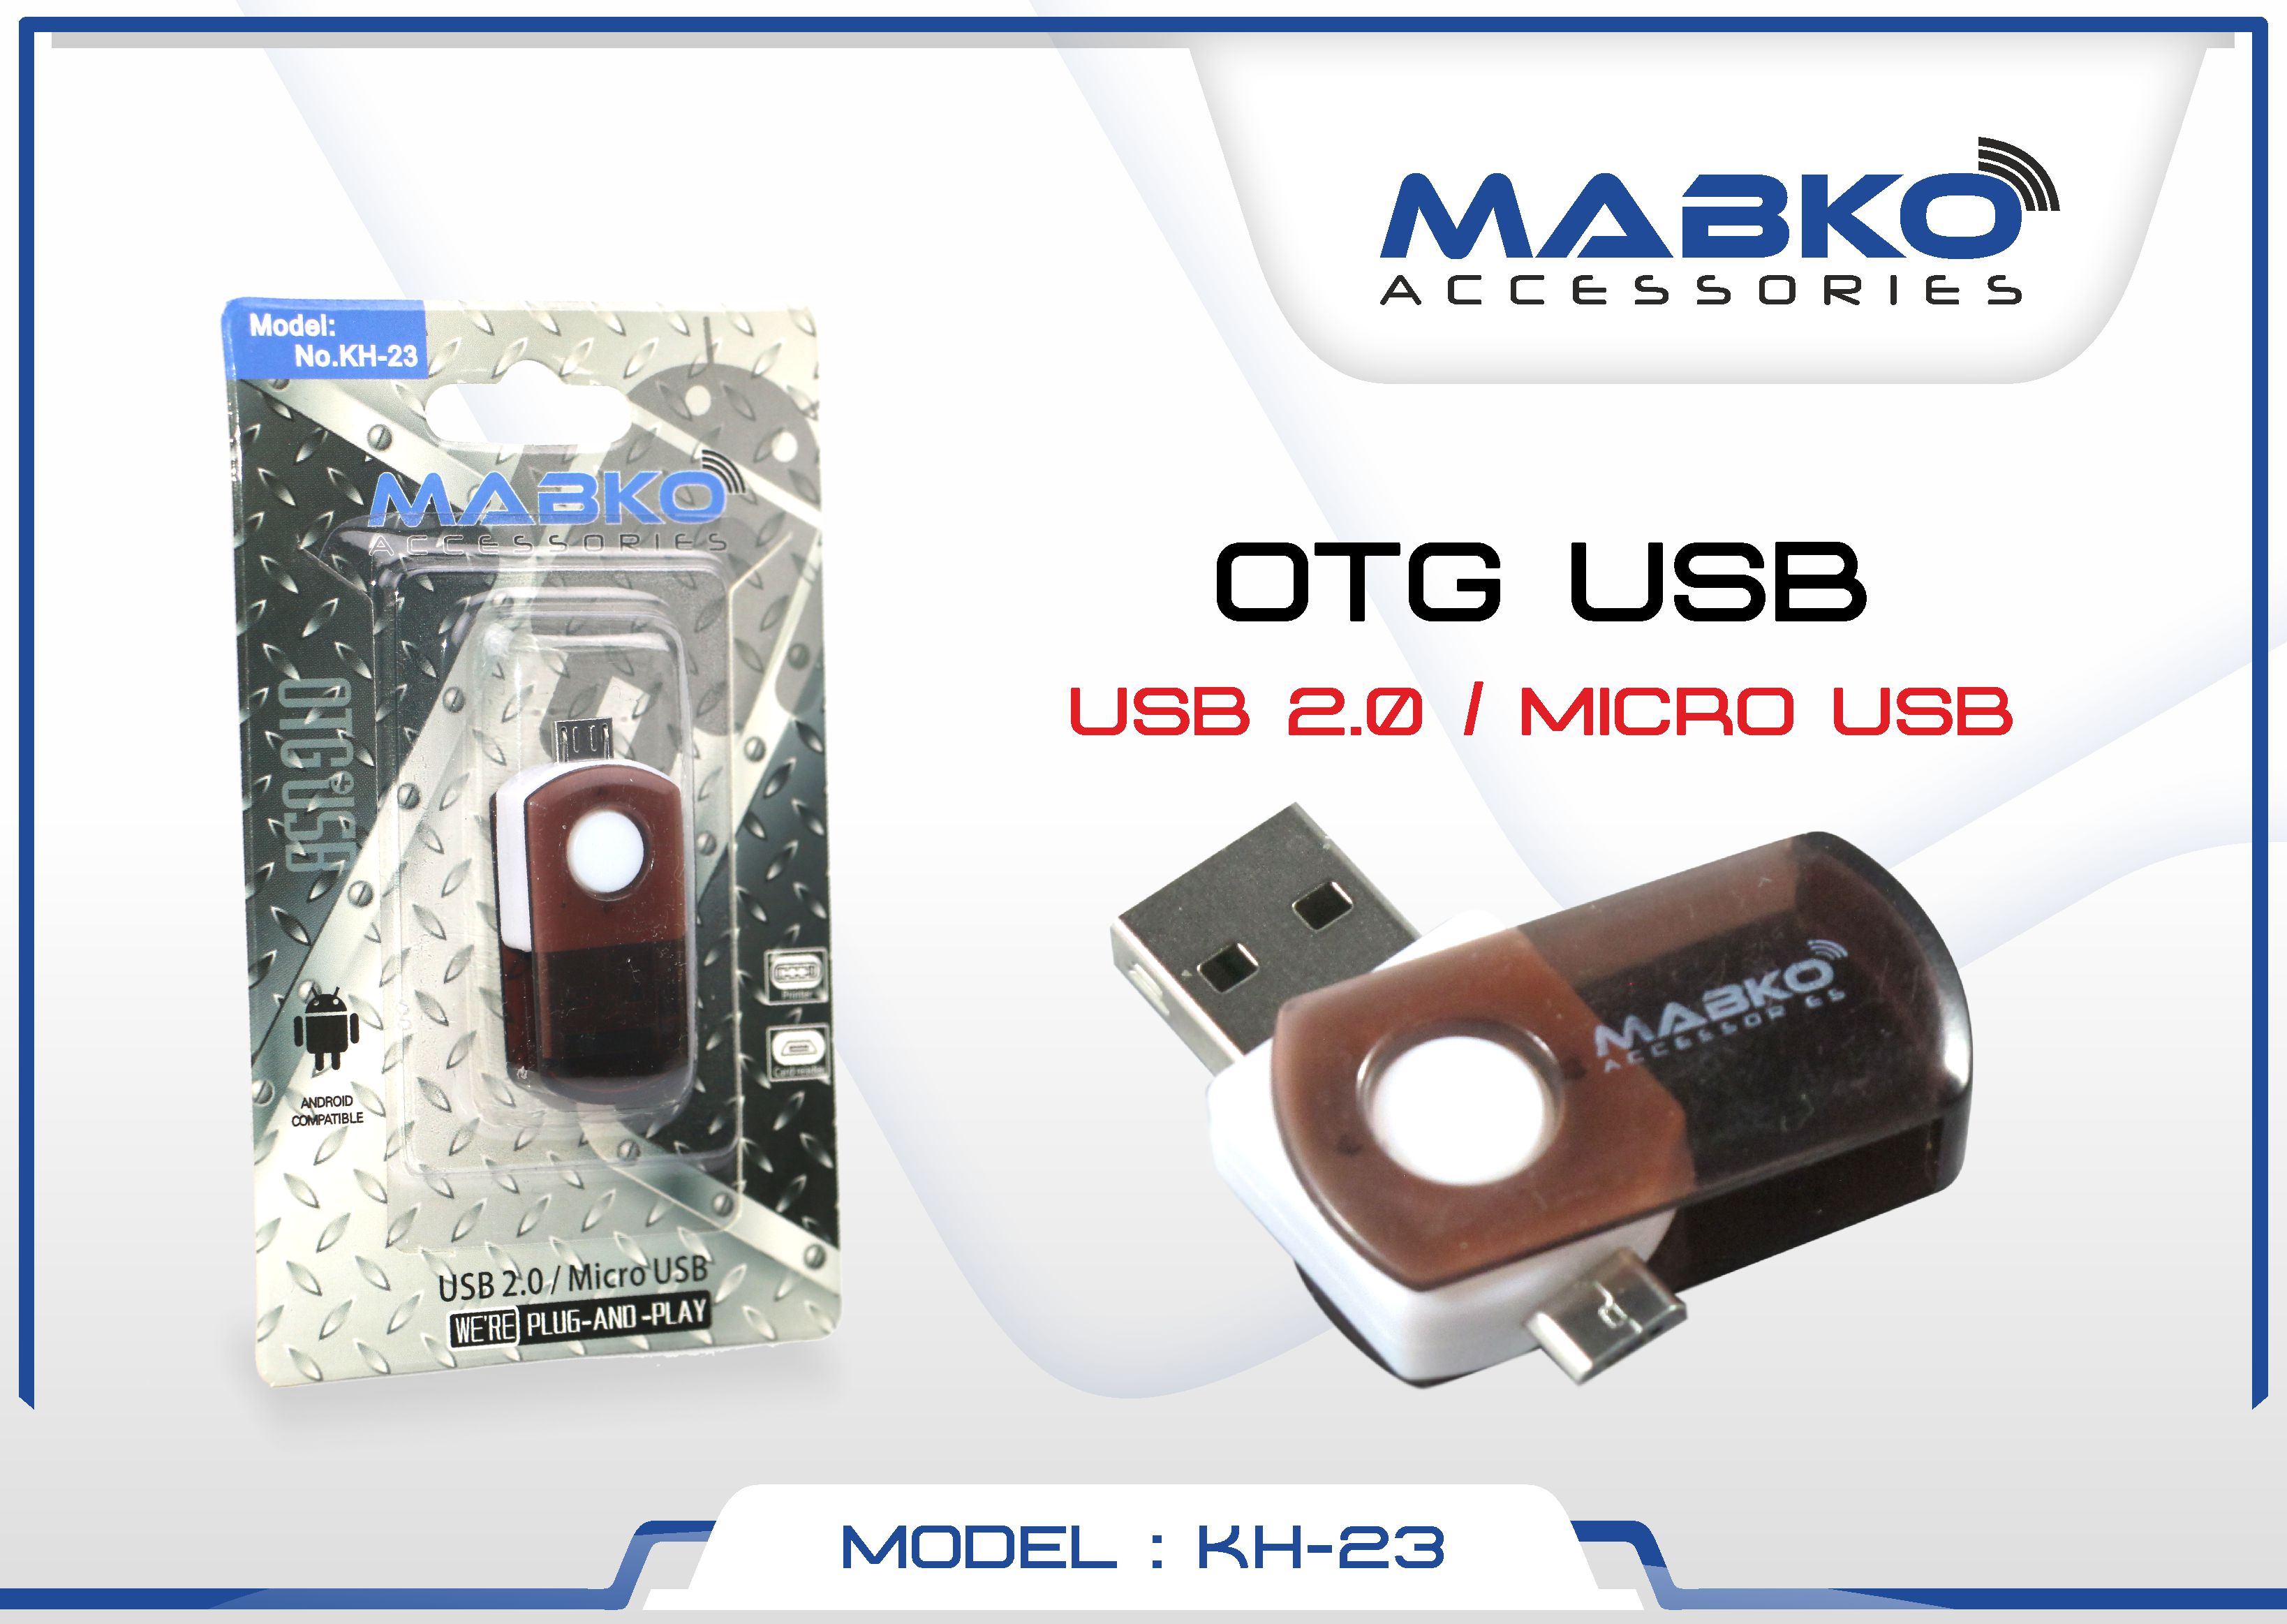 MABKO CABLE KH-C24 